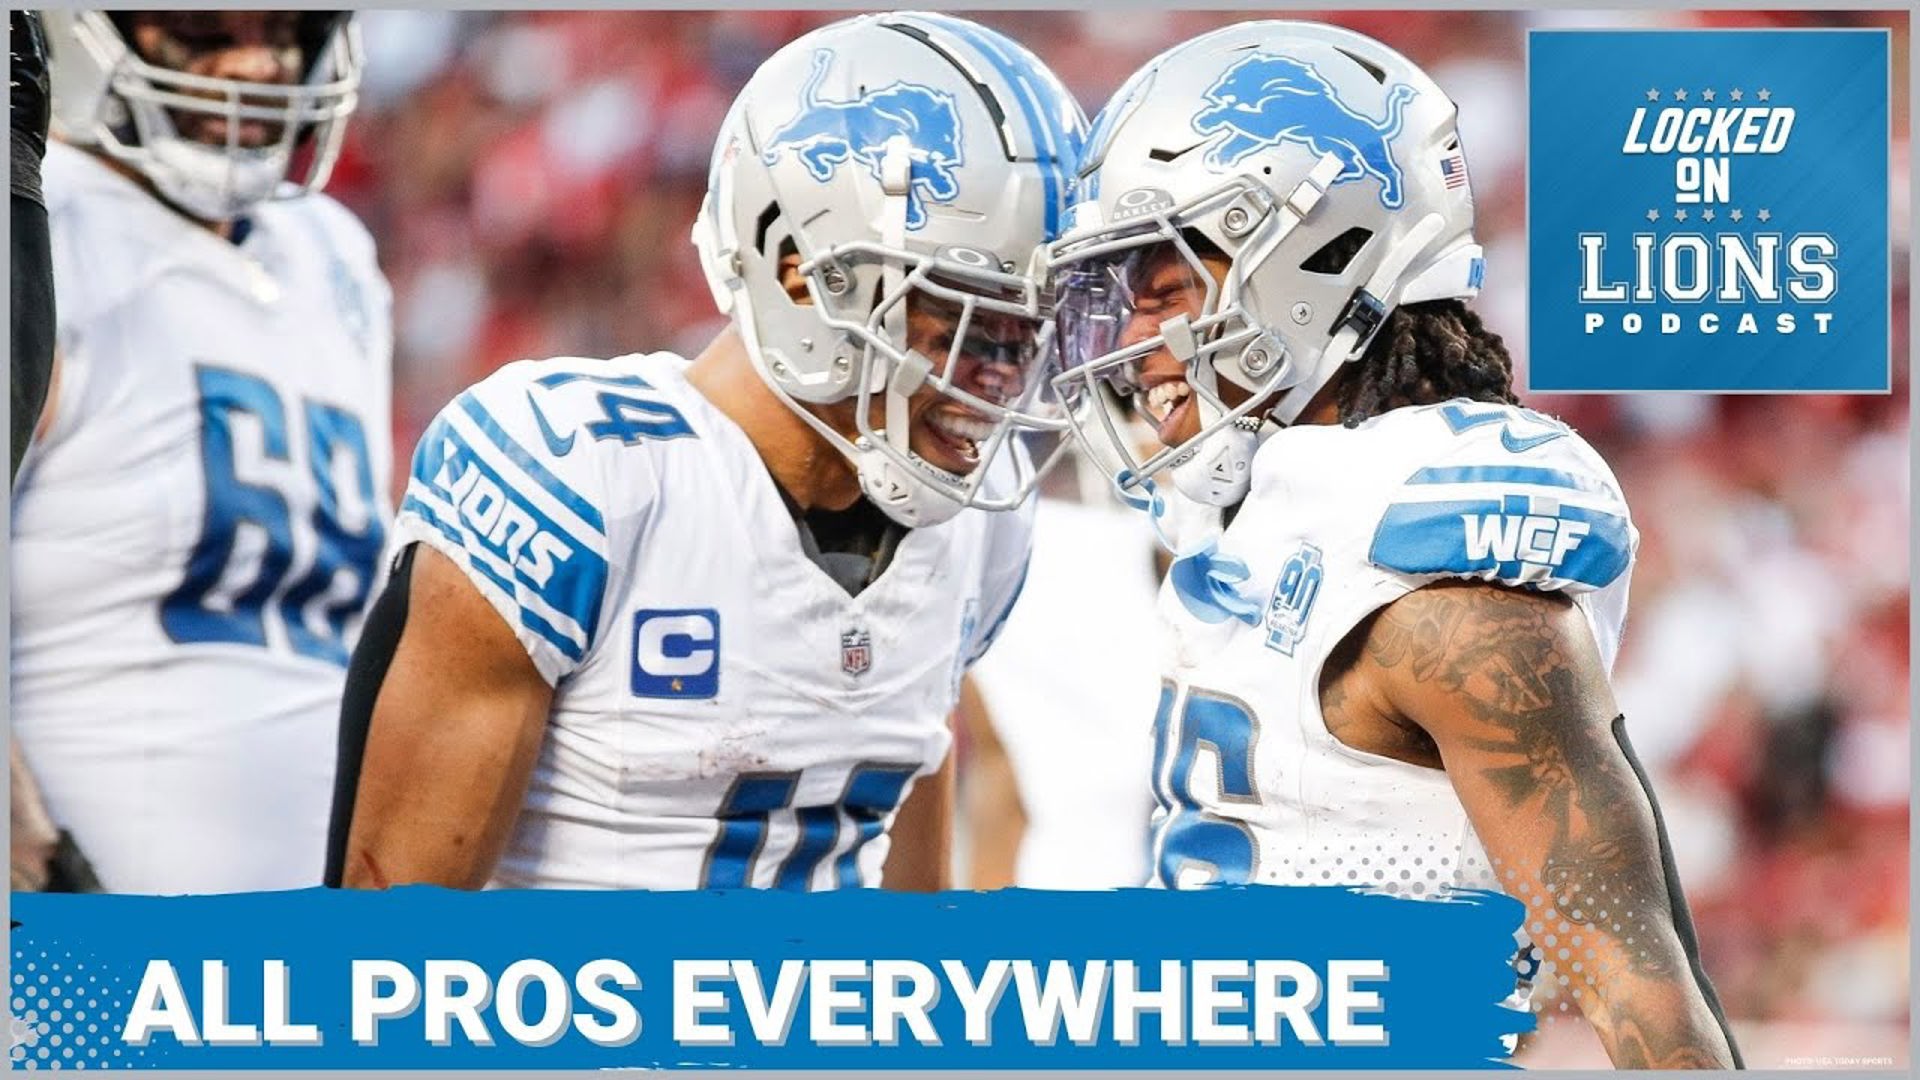 The Detroit Lions Top 10 talent is right there with the best